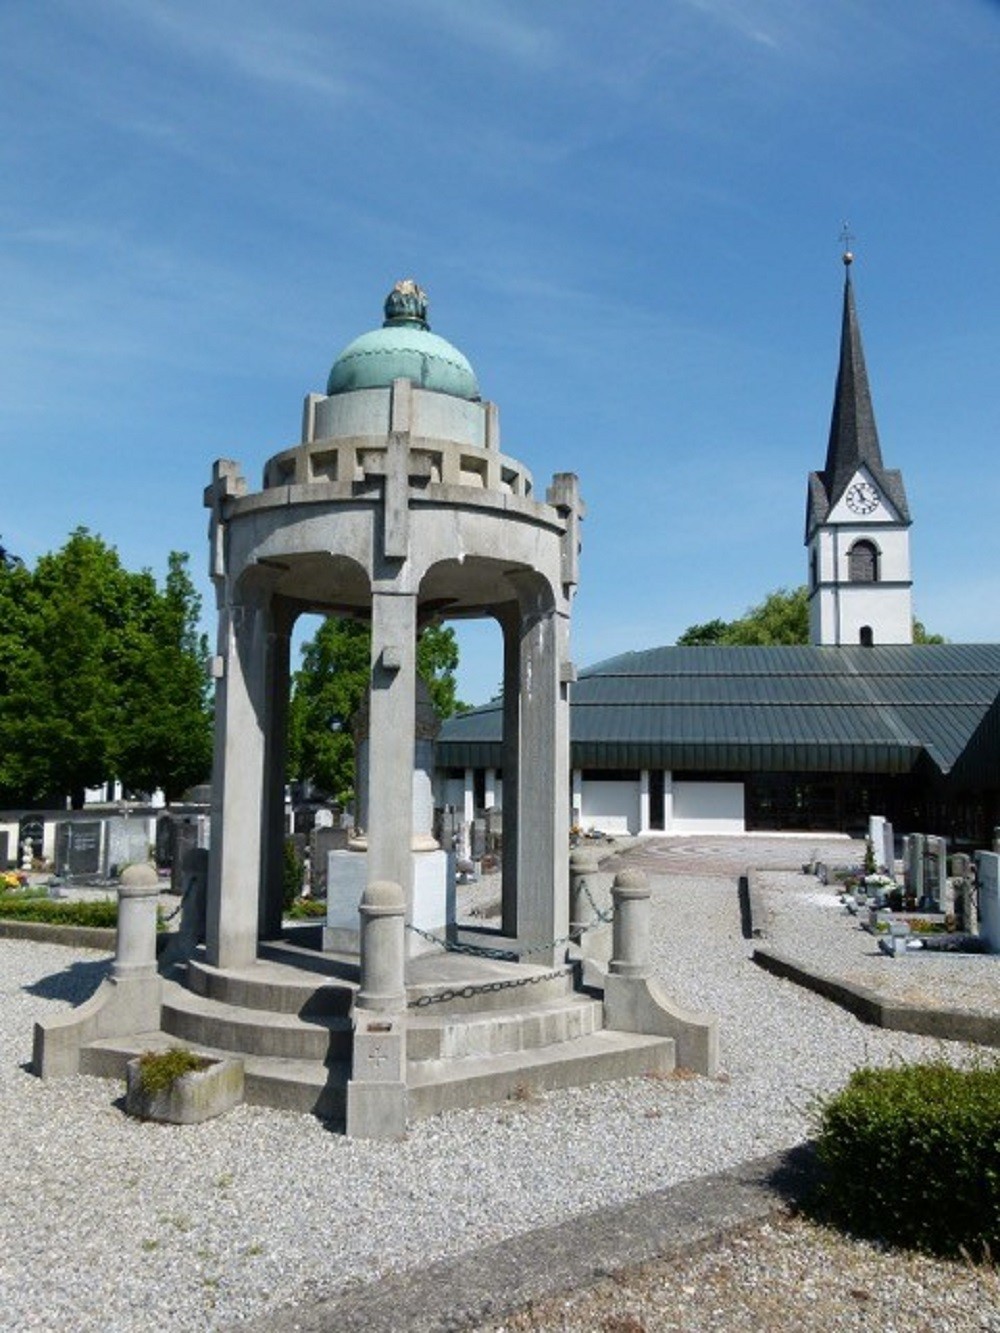 Memorial To Sons Of Fussach Who Died In WW I And WW II #3